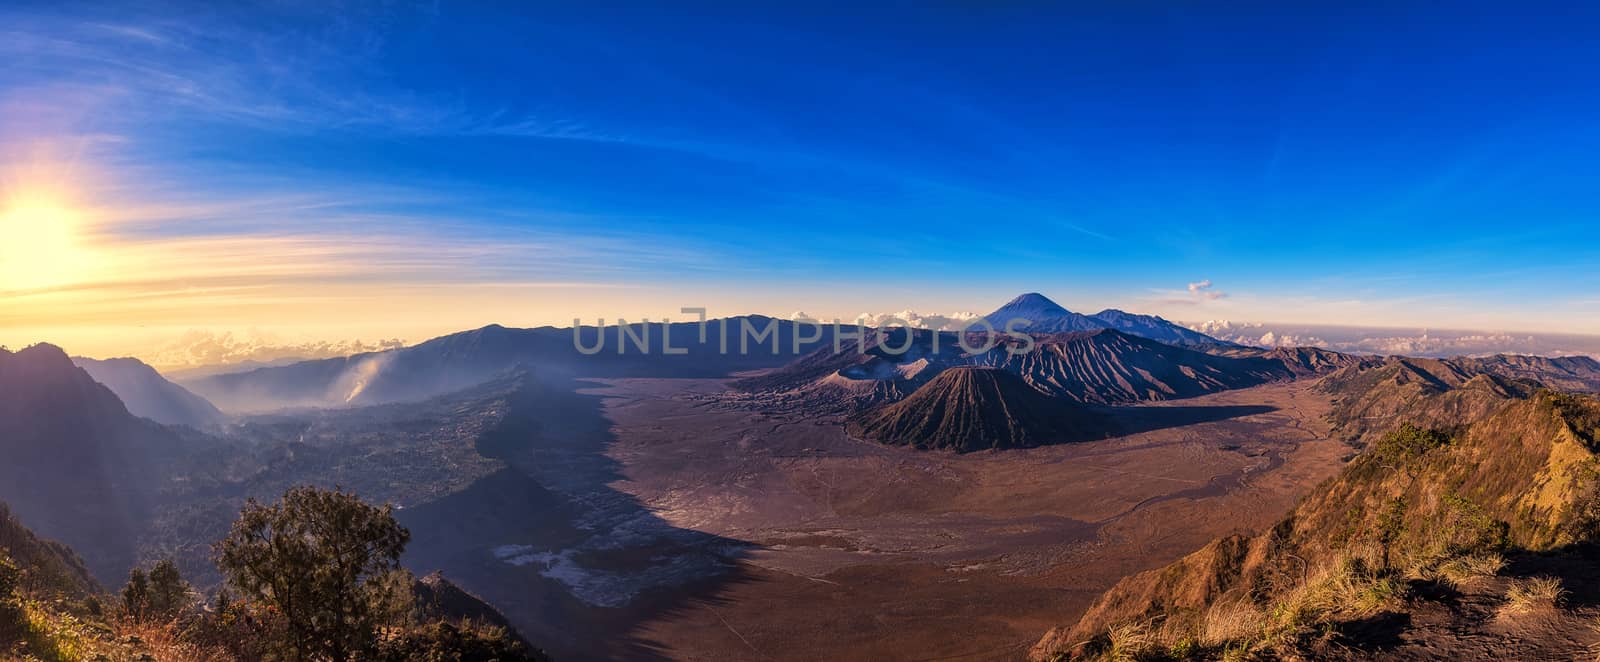 Mount Bromo volcano. by NuwatPhoto